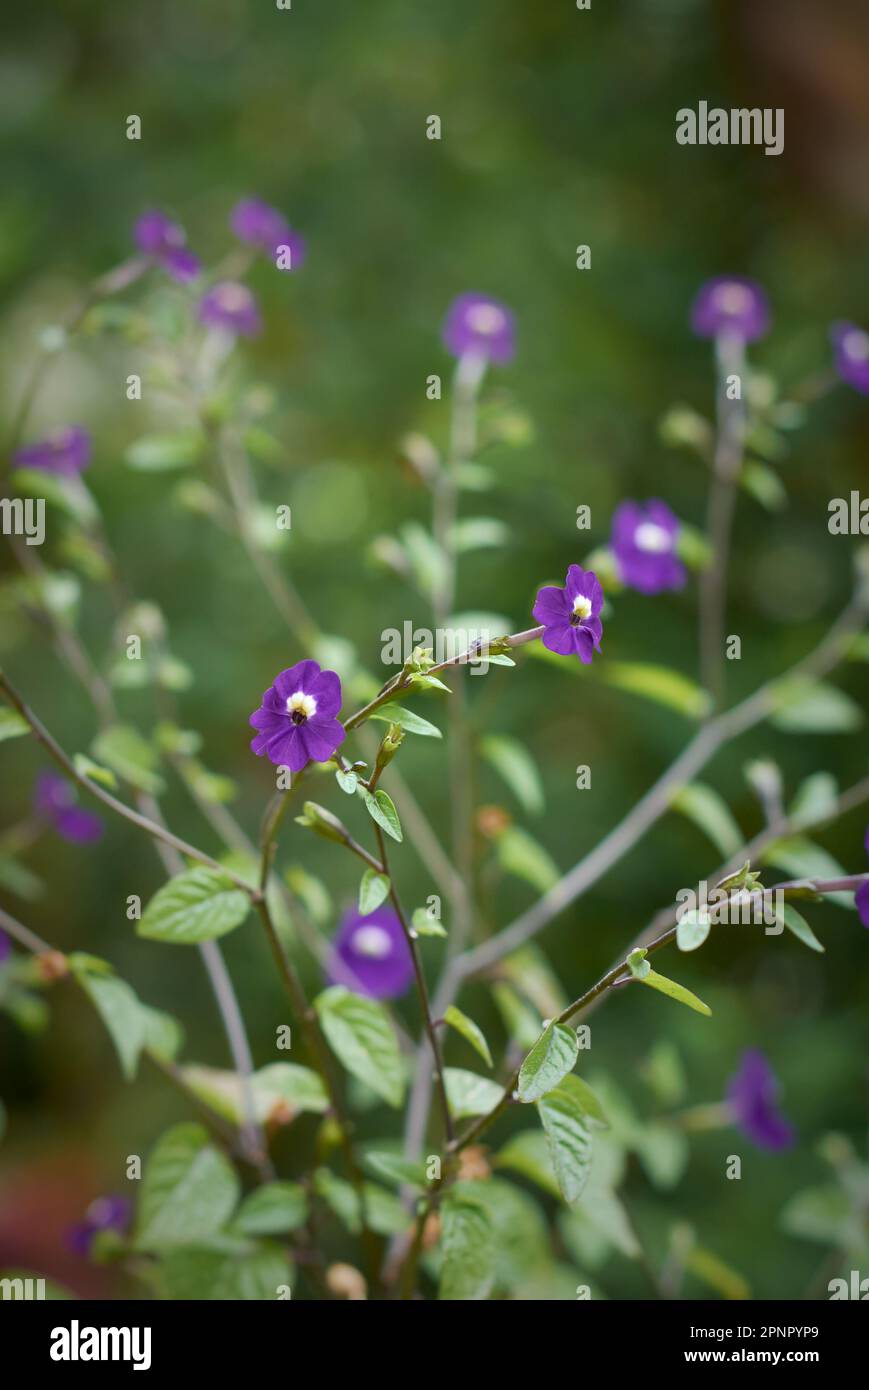 cluster of browallia americana flowers, also known as amethyst flower or bush violet, selective focus with blurry background of small deep blue-purple Stock Photo